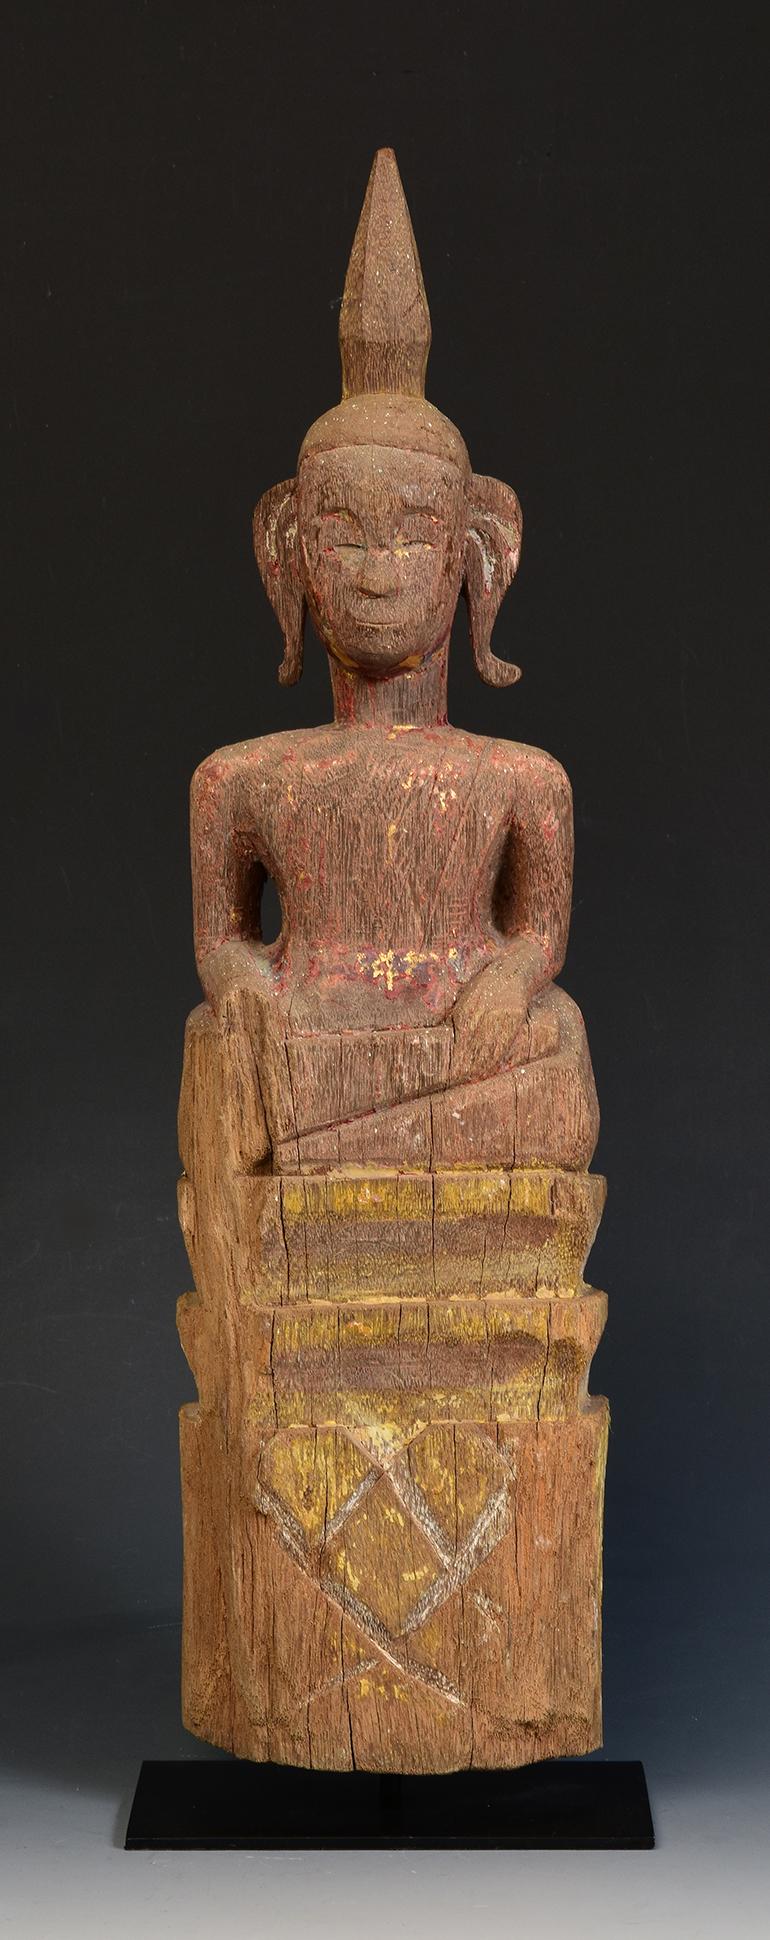 Laos wooden Buddha sitting on a base.

Age: Laos, 19th century
Size: Height 46.8 cm / width 12.5 cm.
Size including stand: Height 48.8 cm
Condition: Nice condition overall (some expected degradation due to its age).

100% satisfaction and